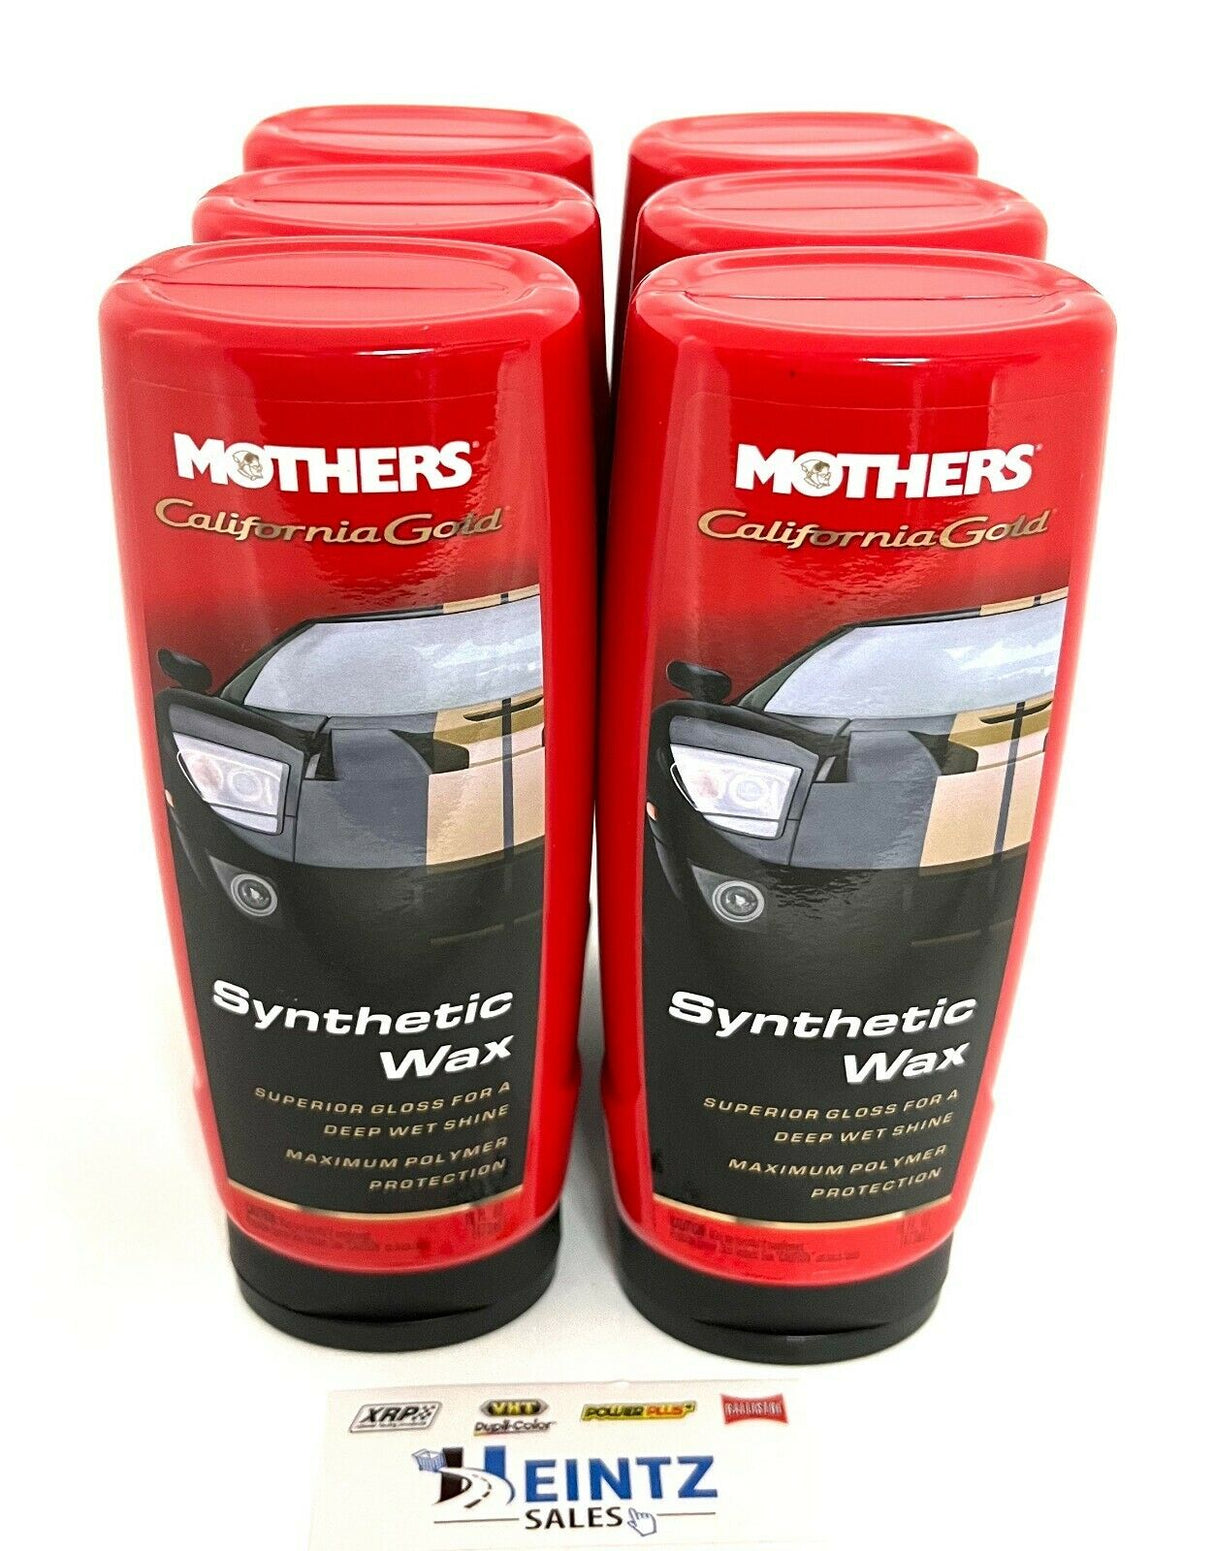 MOTHERS 05716 California Gold Synthetic Wax 6 PACK - Protect - Wet Shine - 16 oz.